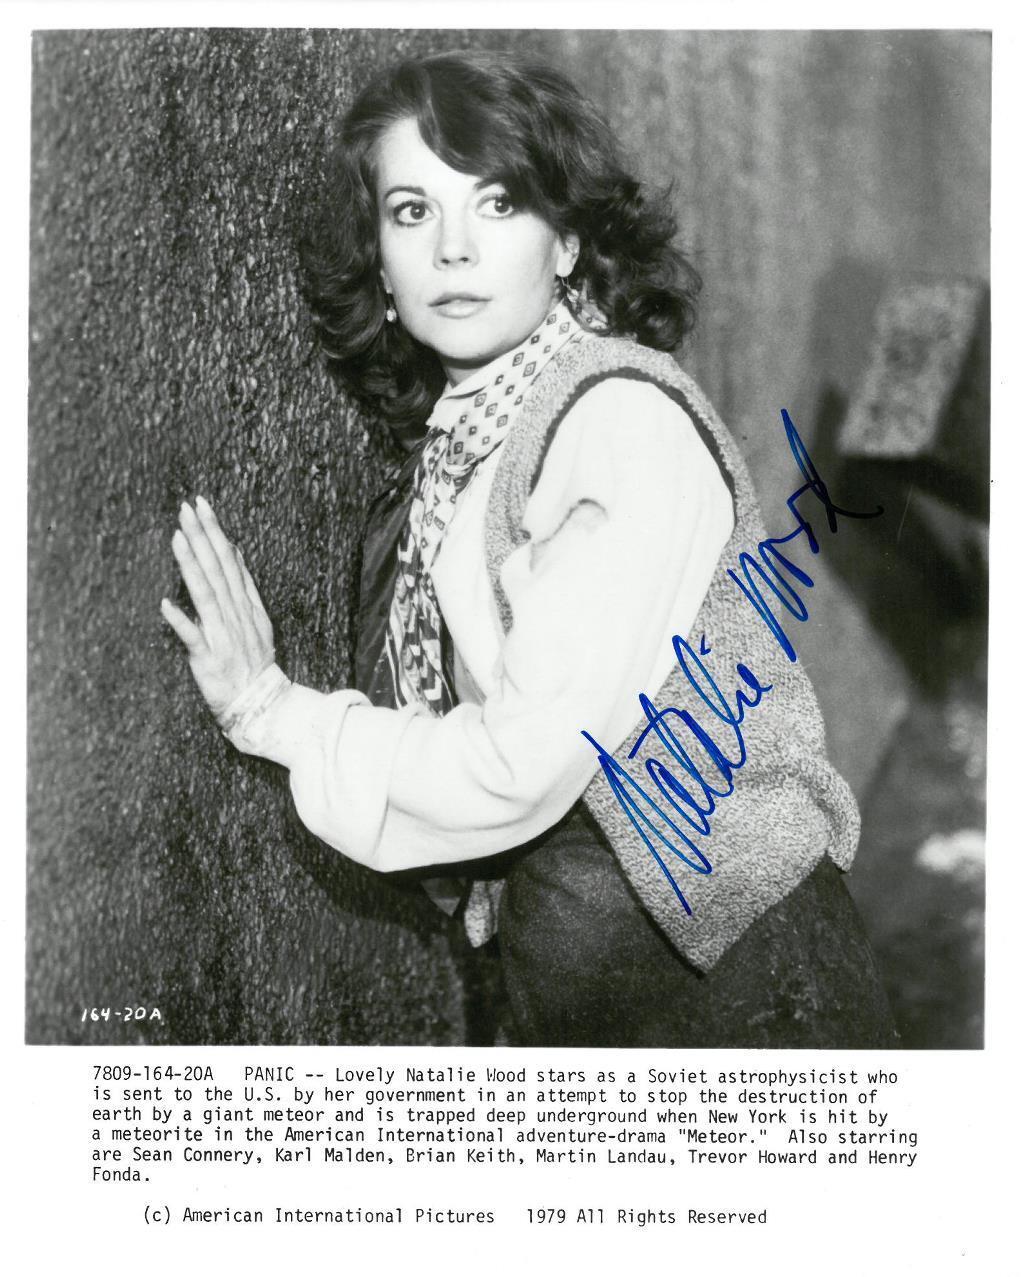 Natalie Wood Signed Authentic Autographed 8x10 B/W Promo Photo Poster painting PSA/DNA #AF02450